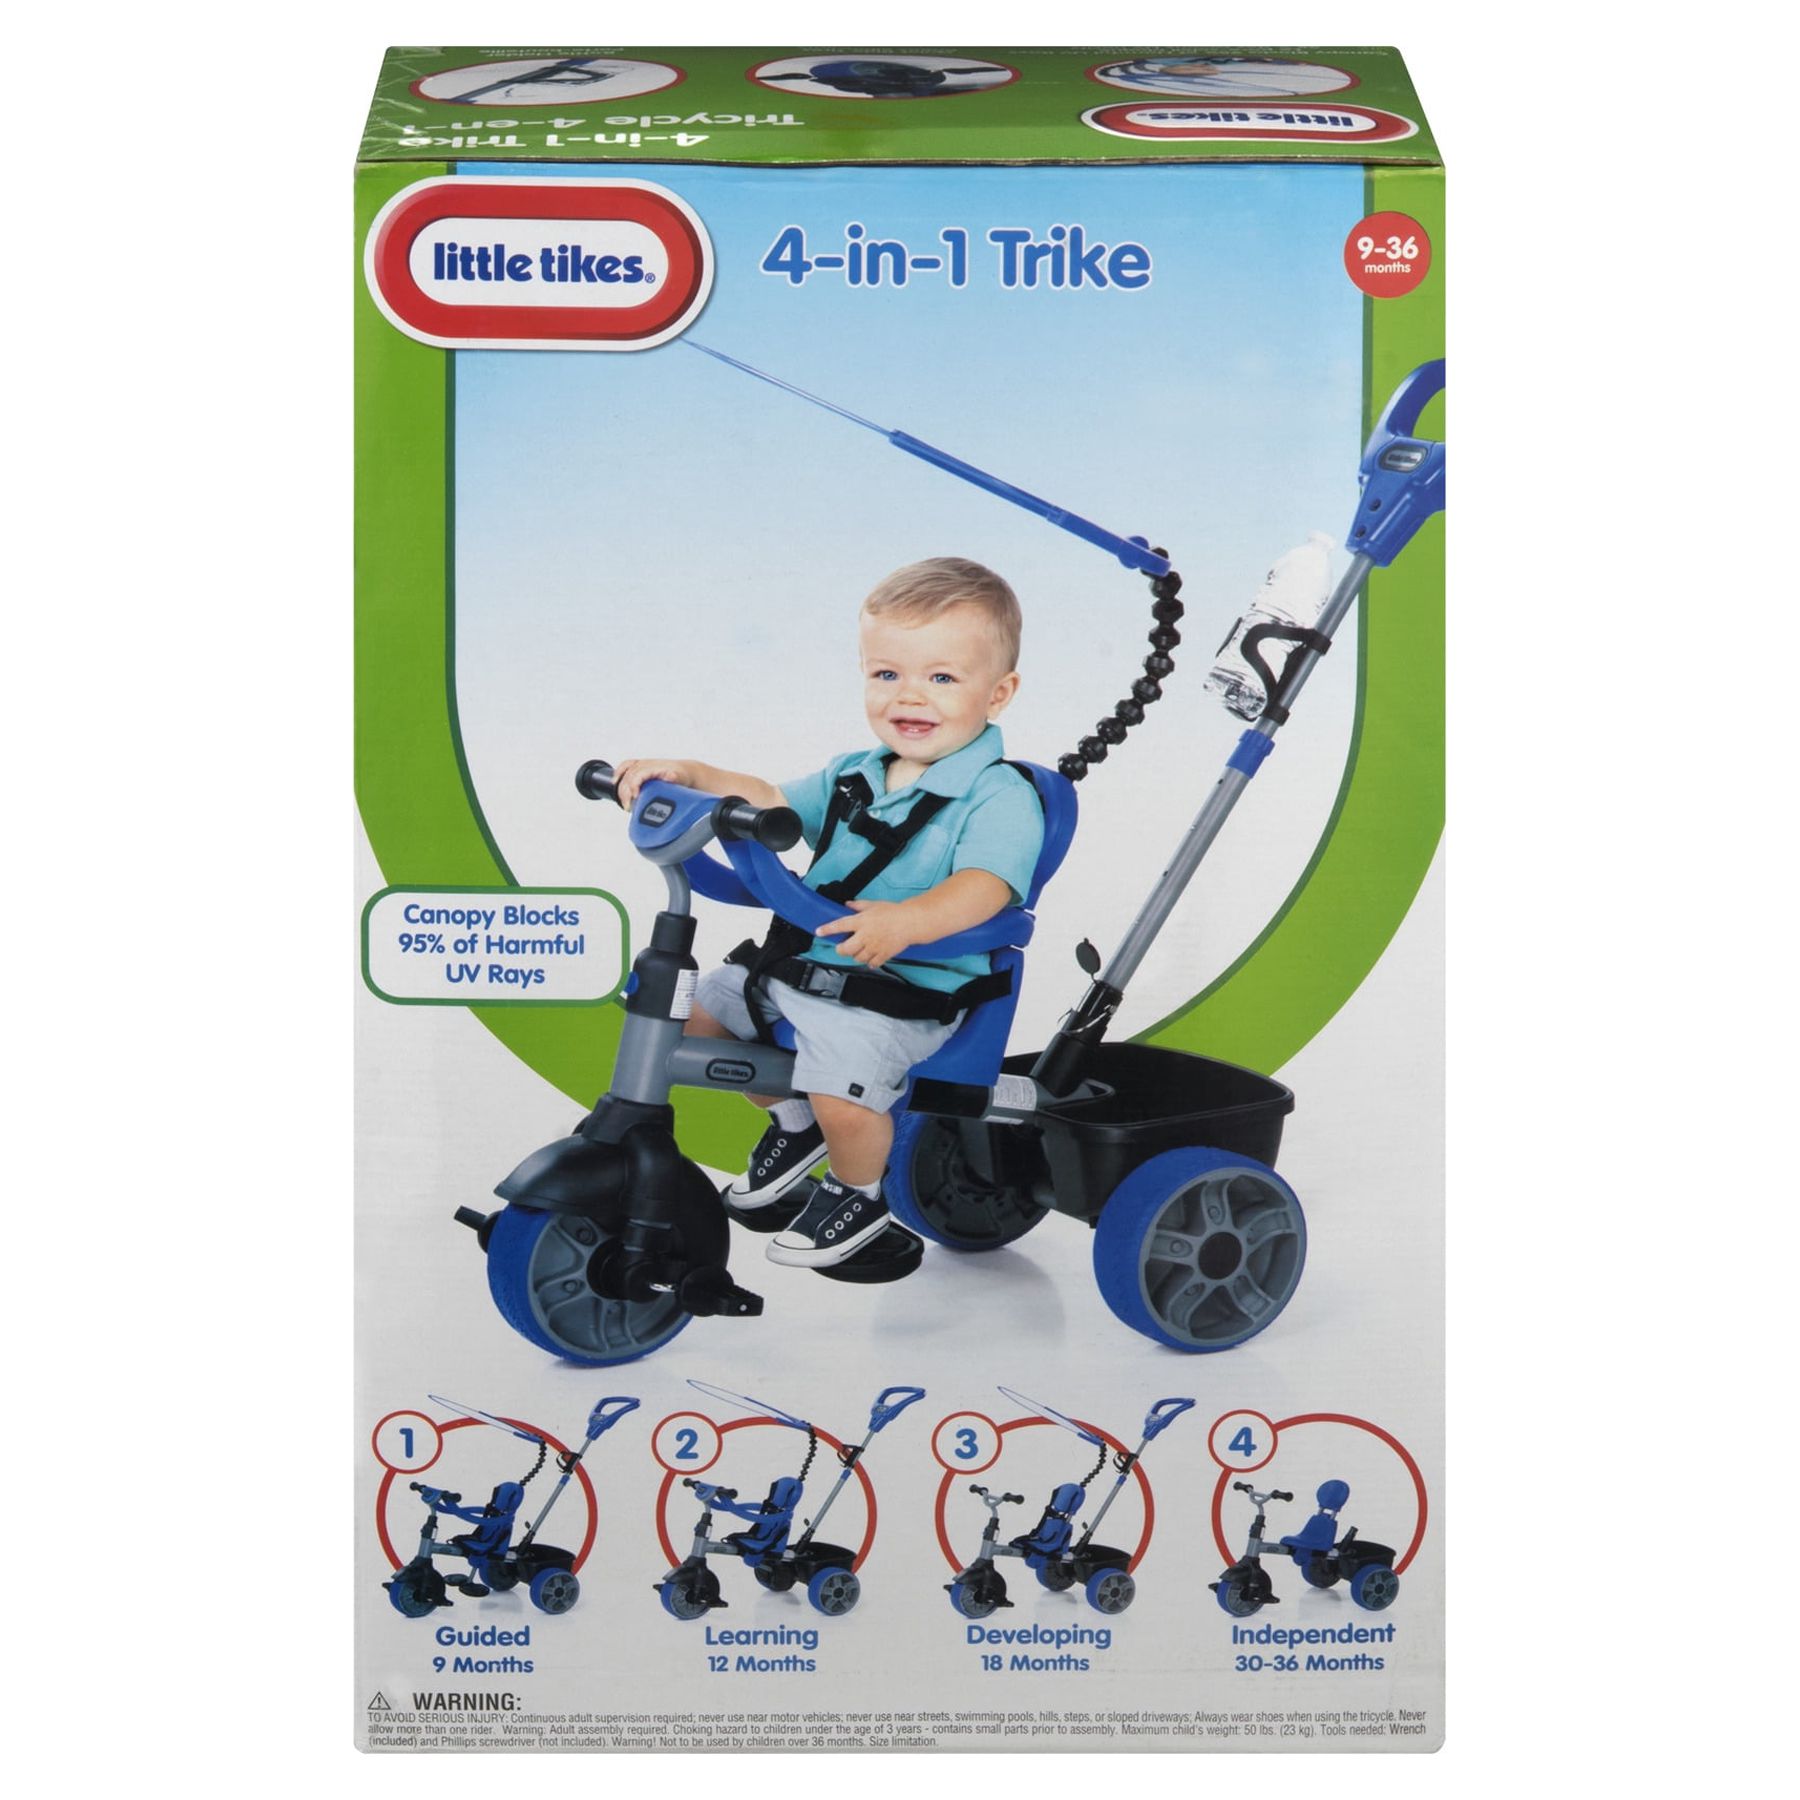 Little Tikes 4-in-1 Basic Edition Trike in Blue, Convertible Tricycle for Toddlers Tricycle with 4 Stages of Growth and Shade Canopy- For Kids Kids Boys Girls Ages 9 Months to 3 Years Old - image 4 of 8